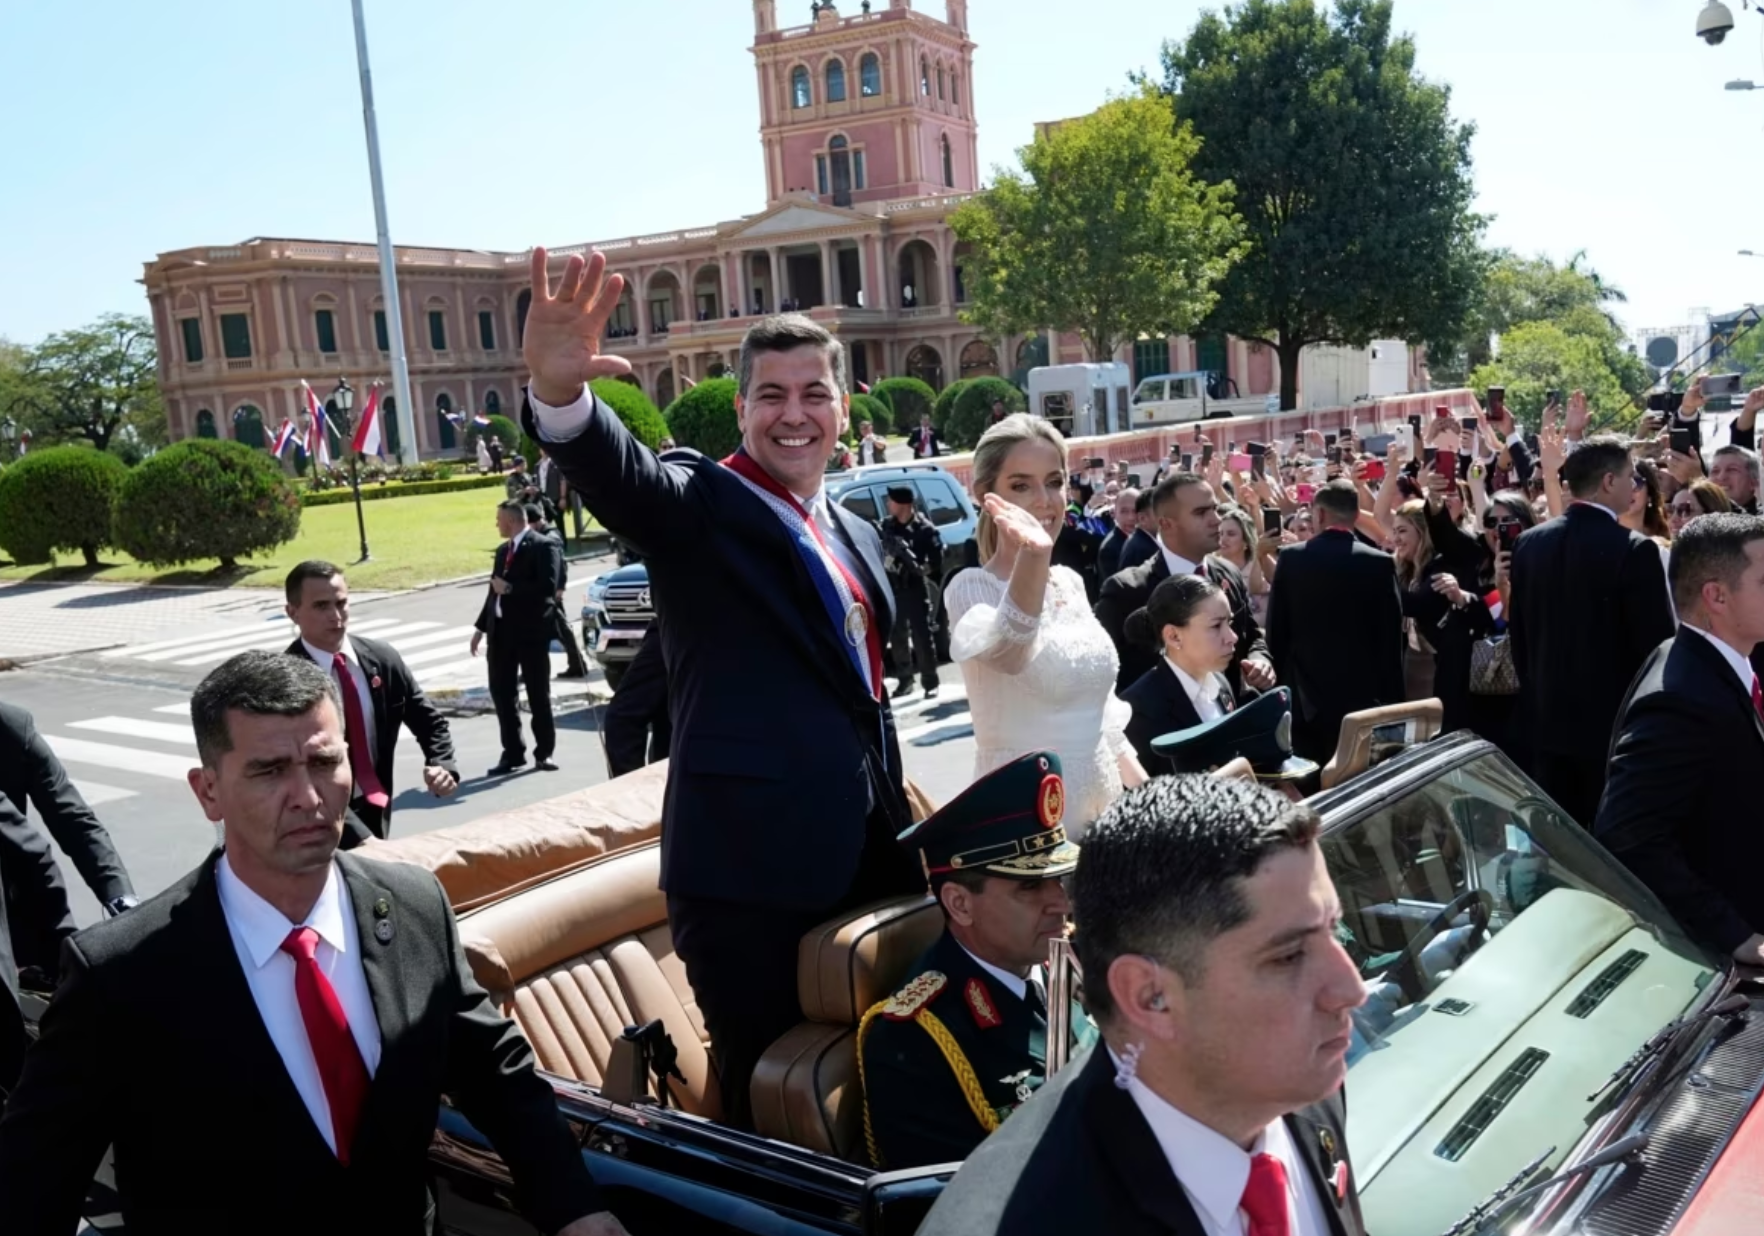 Santiago Peña takes office as president of Paraguay, promises prosperity and international presence